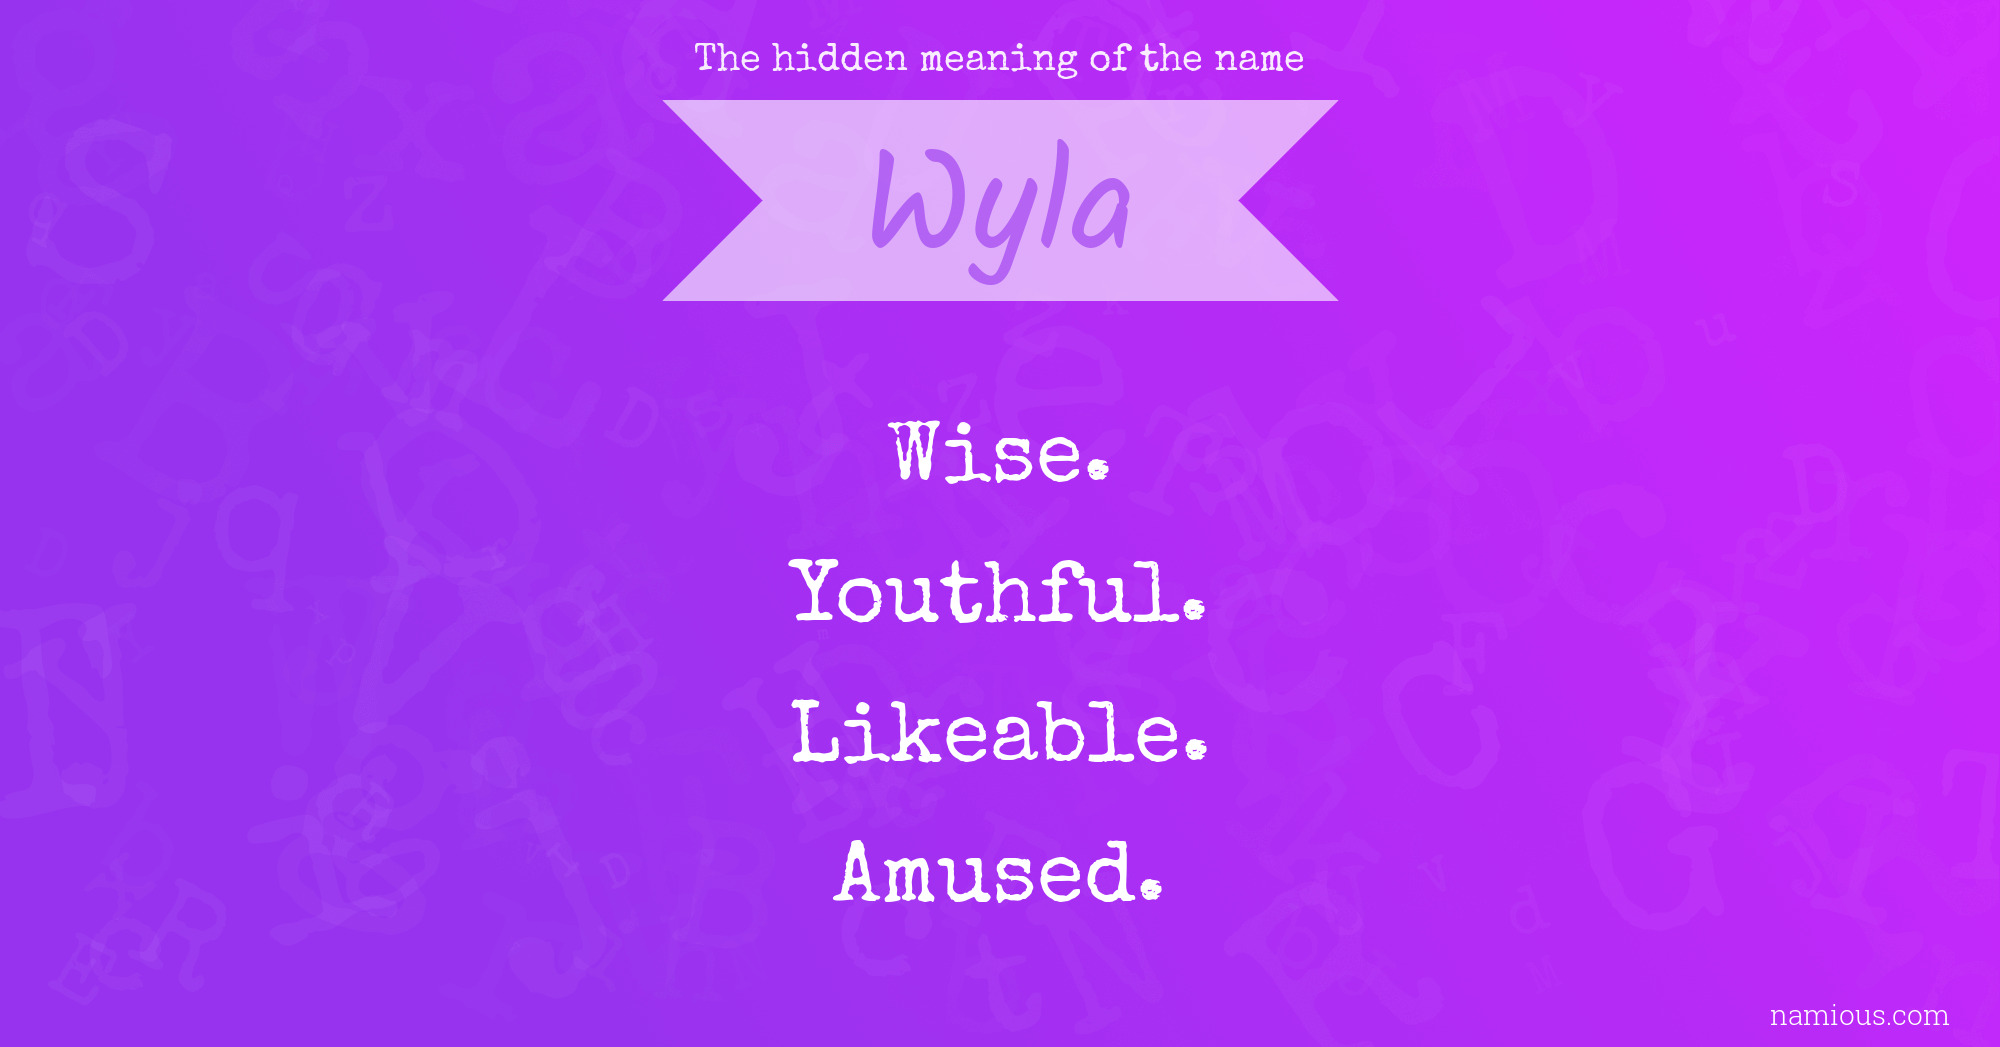 The hidden meaning of the name Wyla